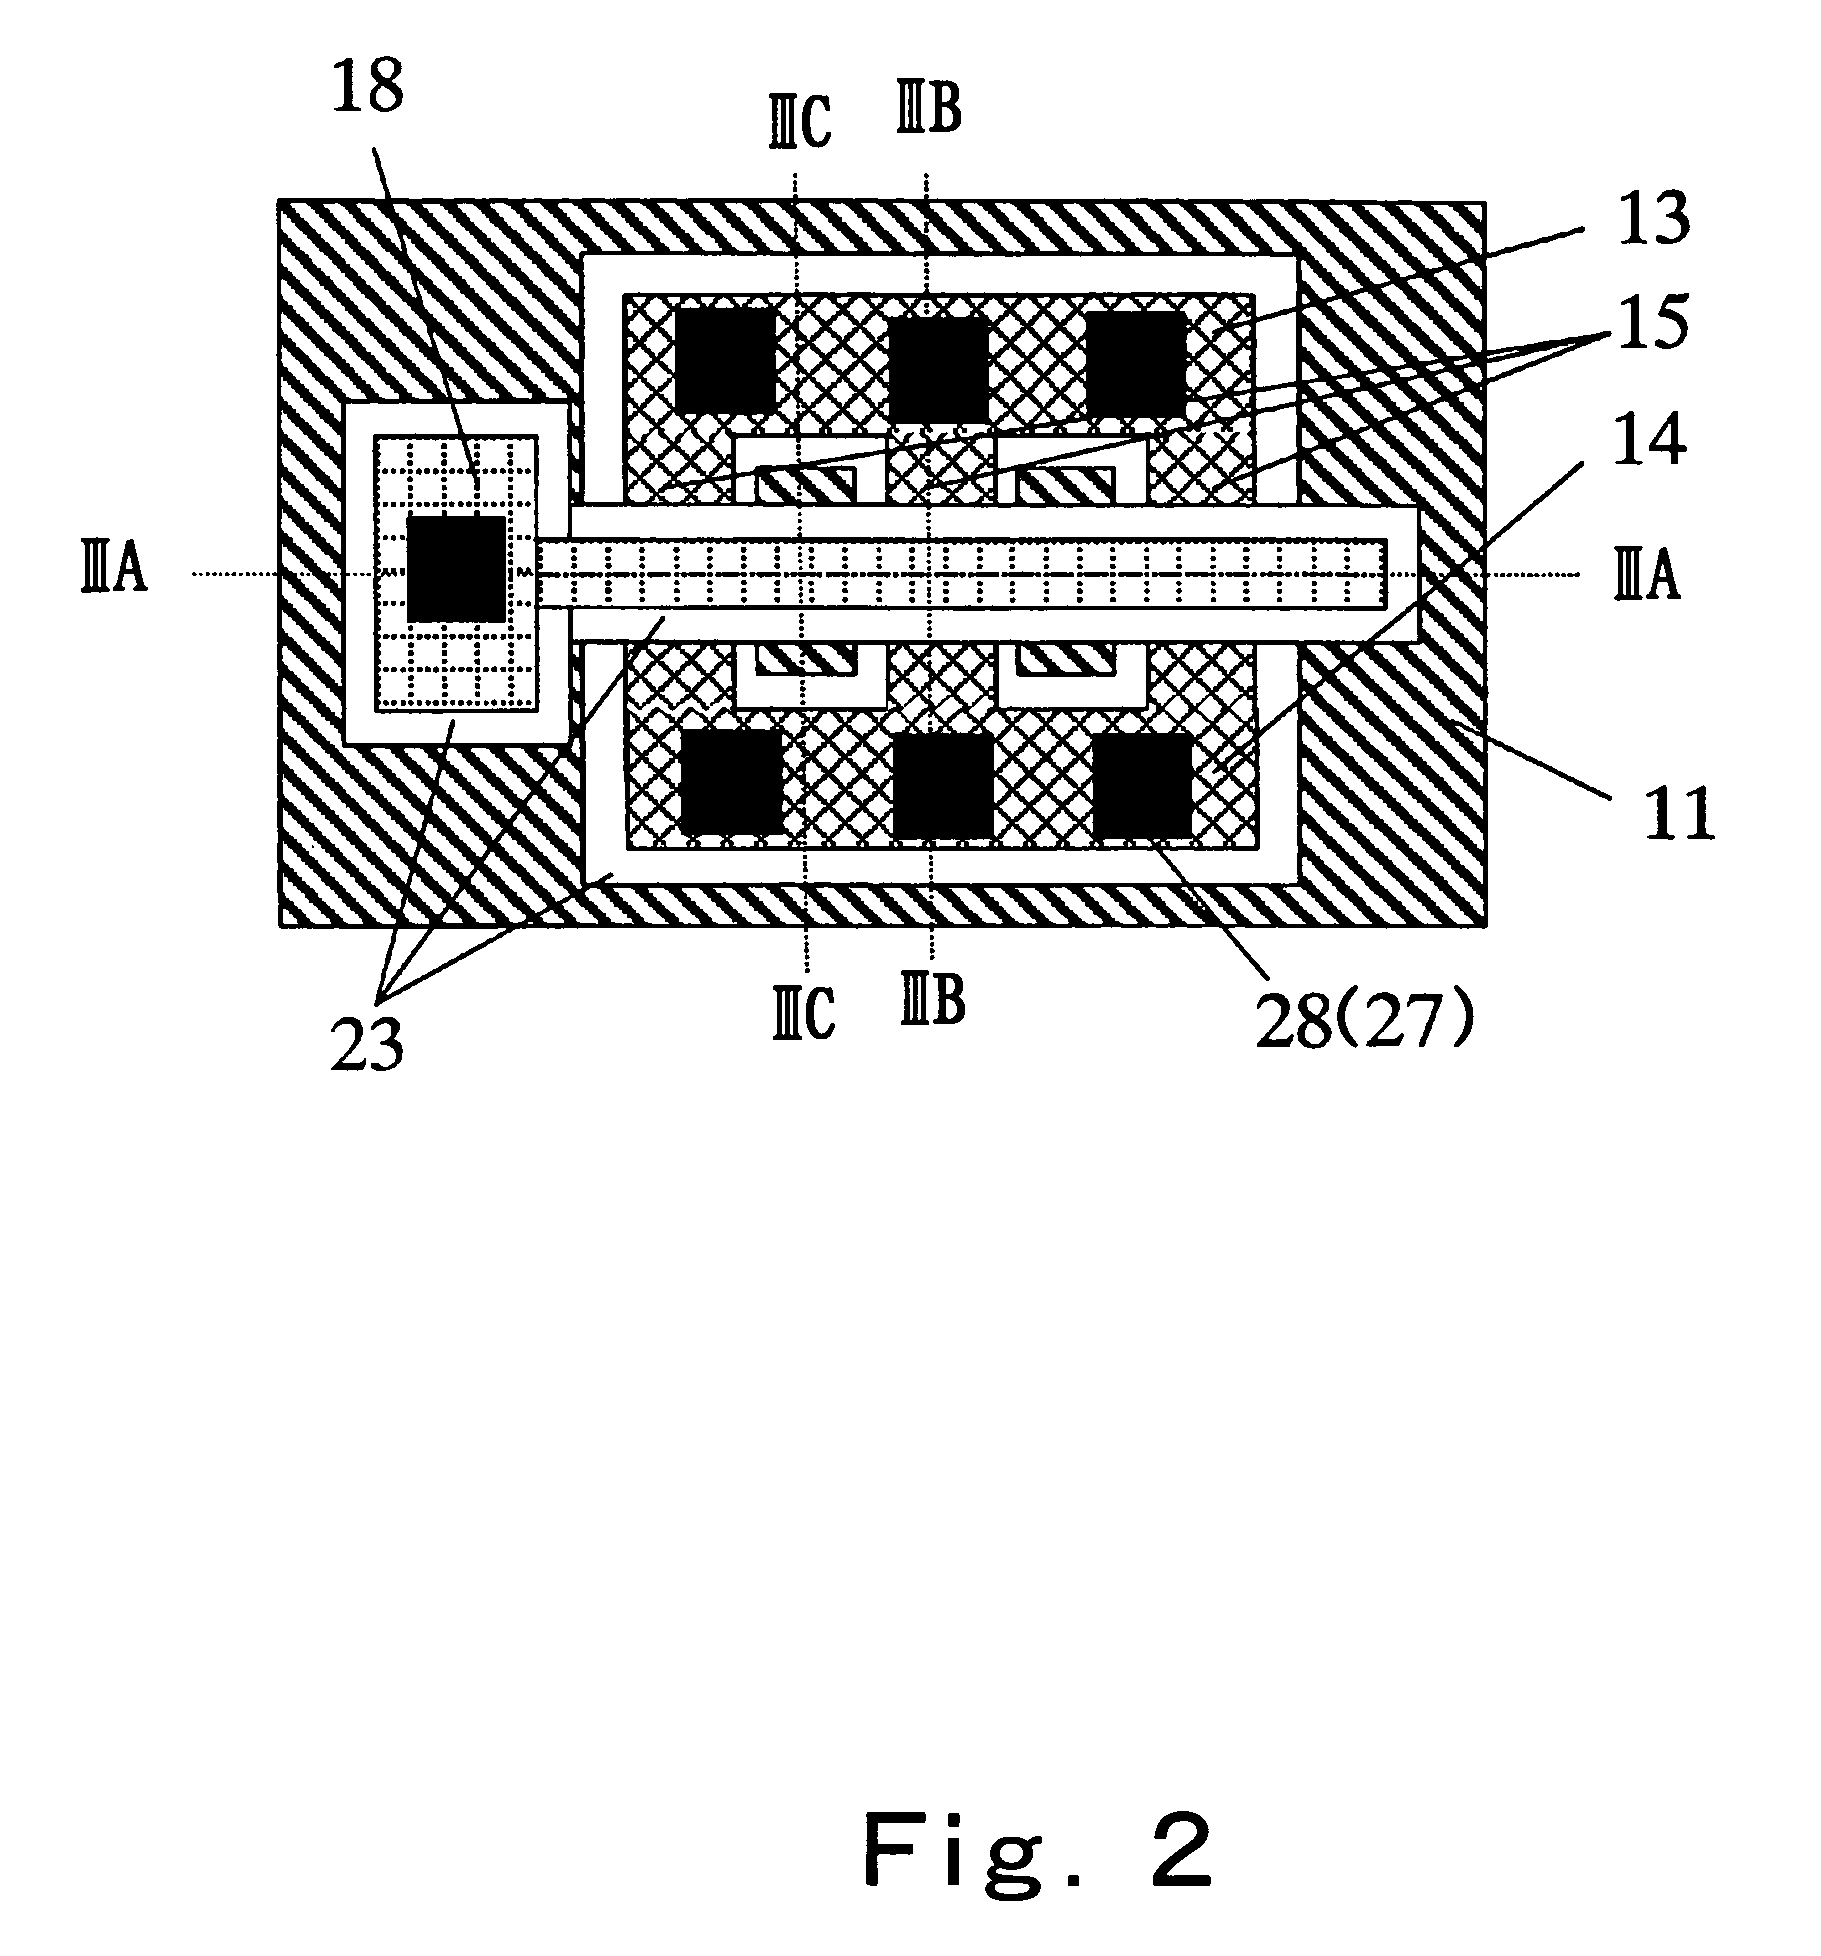 Strained channel finFET device